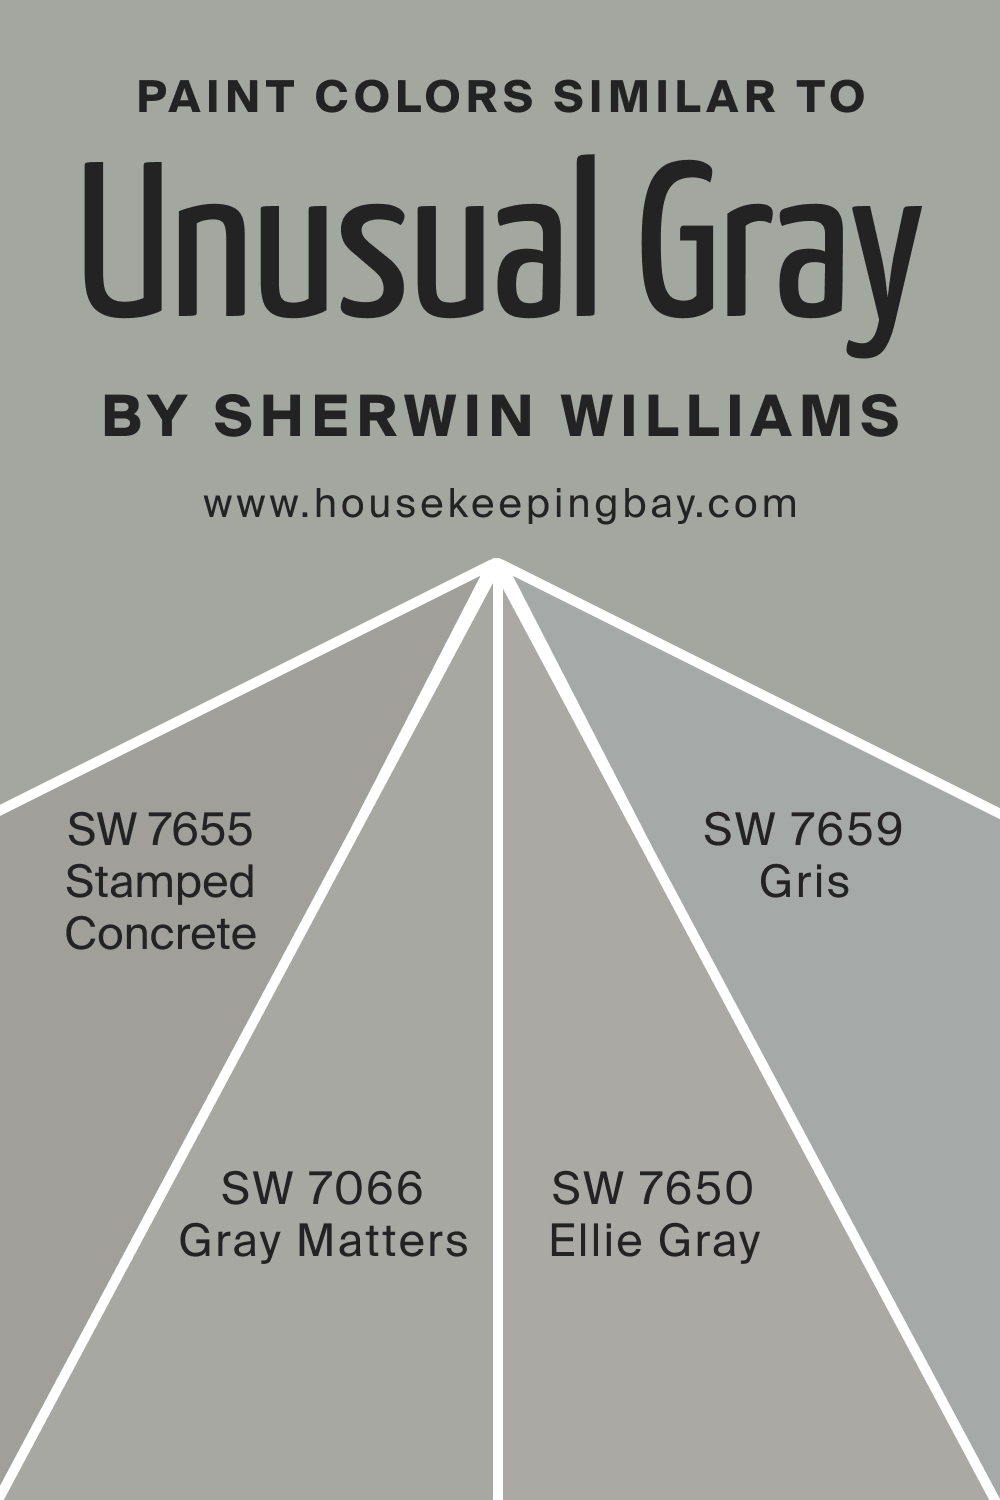 Paint Color Similar to SW 7059 Unusual Gray by Sherwin Williams